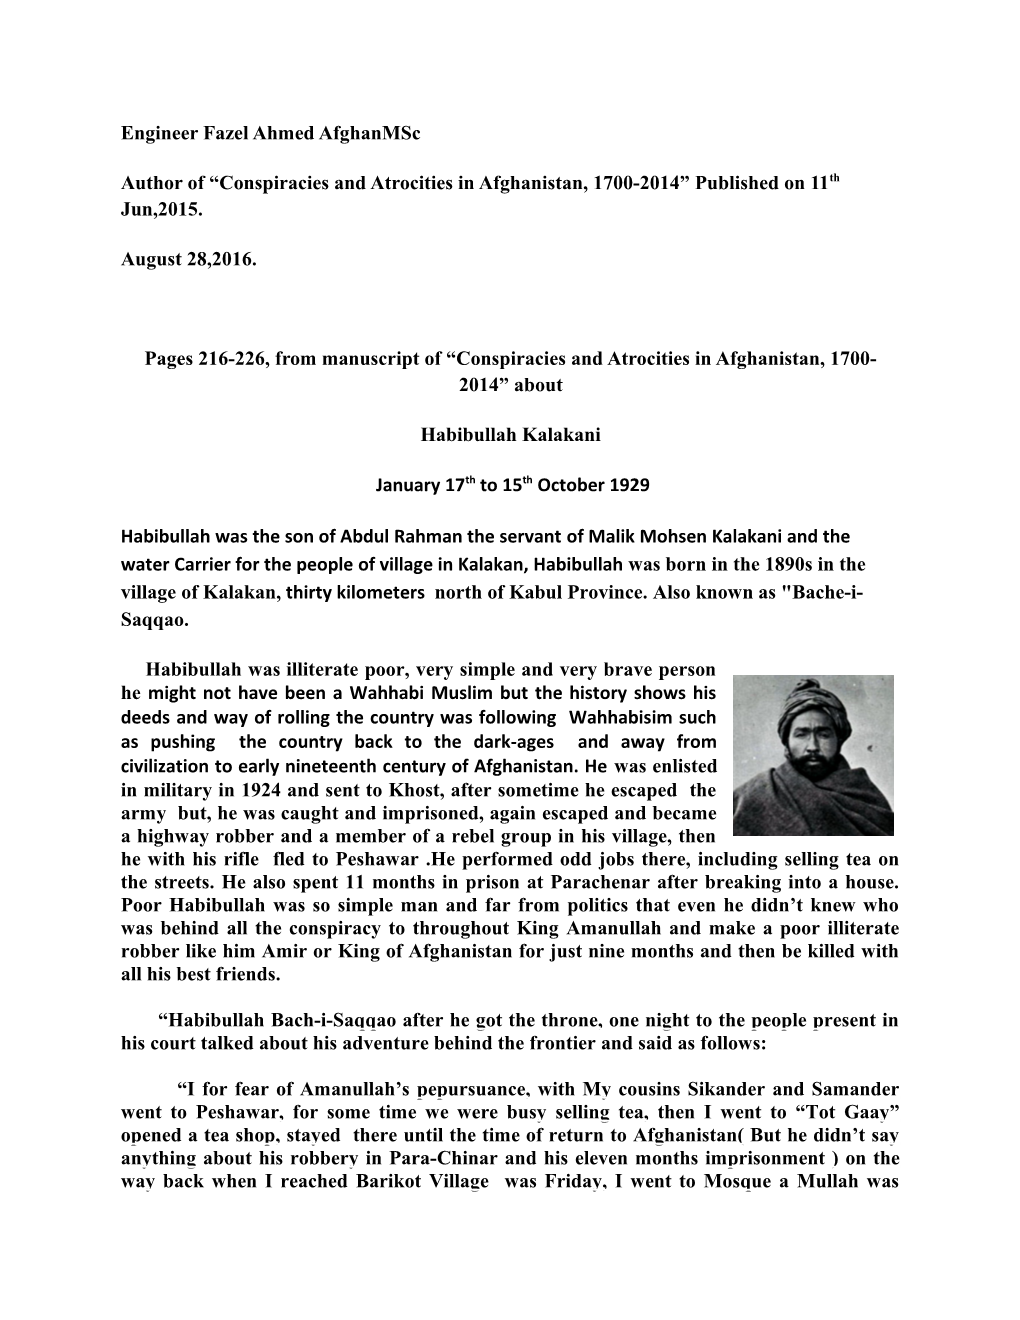 Conspiracies and Atrocities in Afghanistan, 1700-2014” Published on 11Th Jun,2015